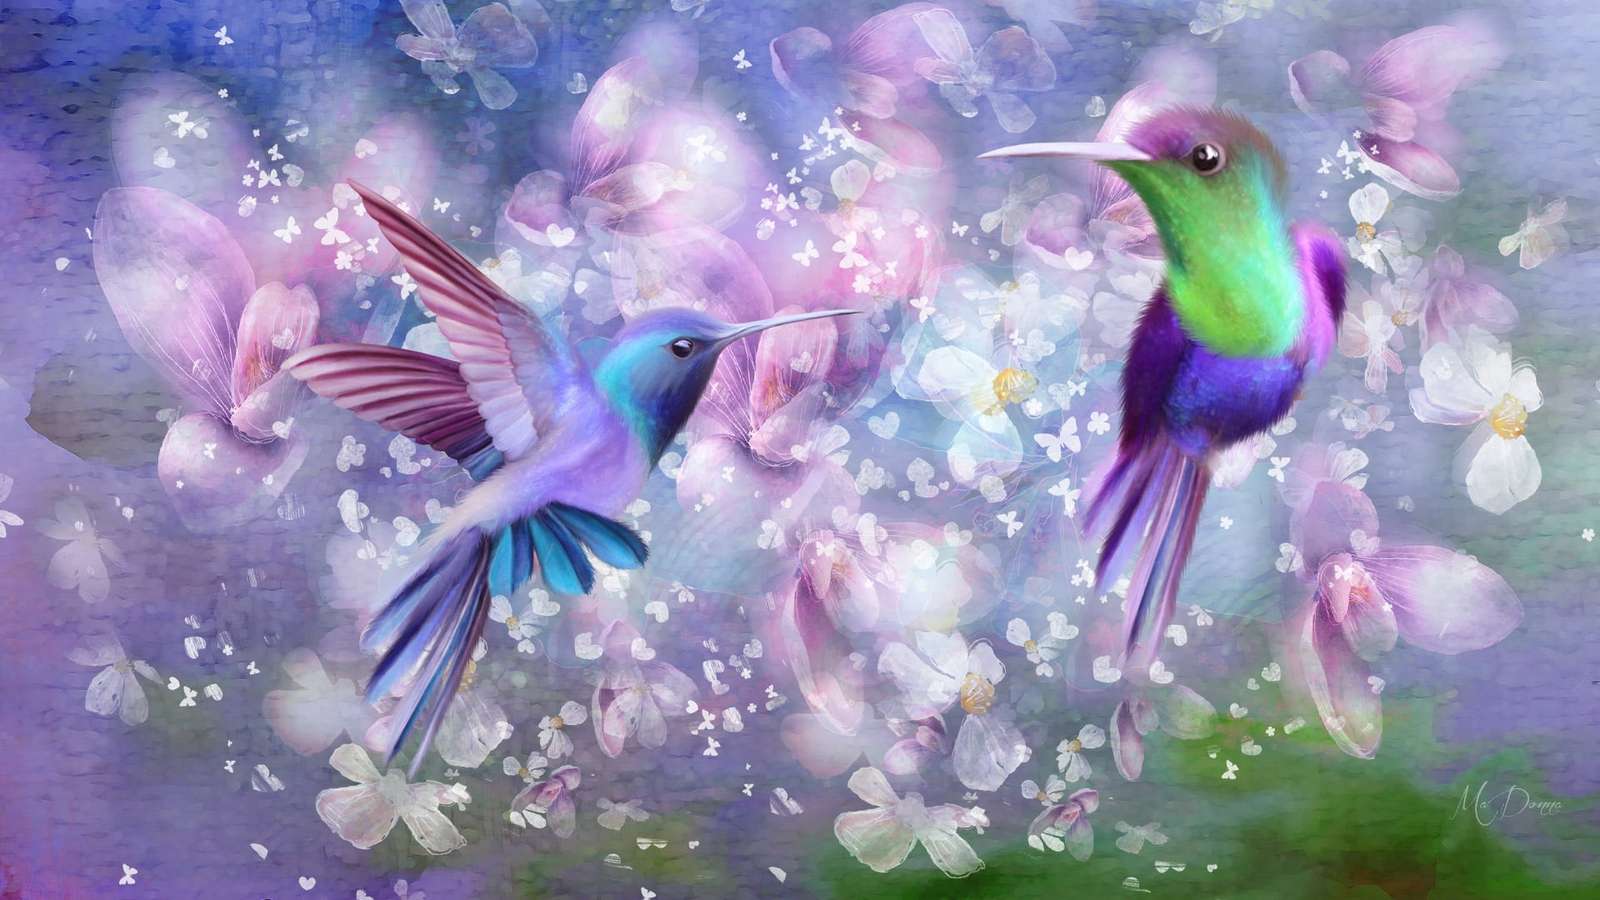 Humming-birds among the flowers - Colibris mignons online puzzle